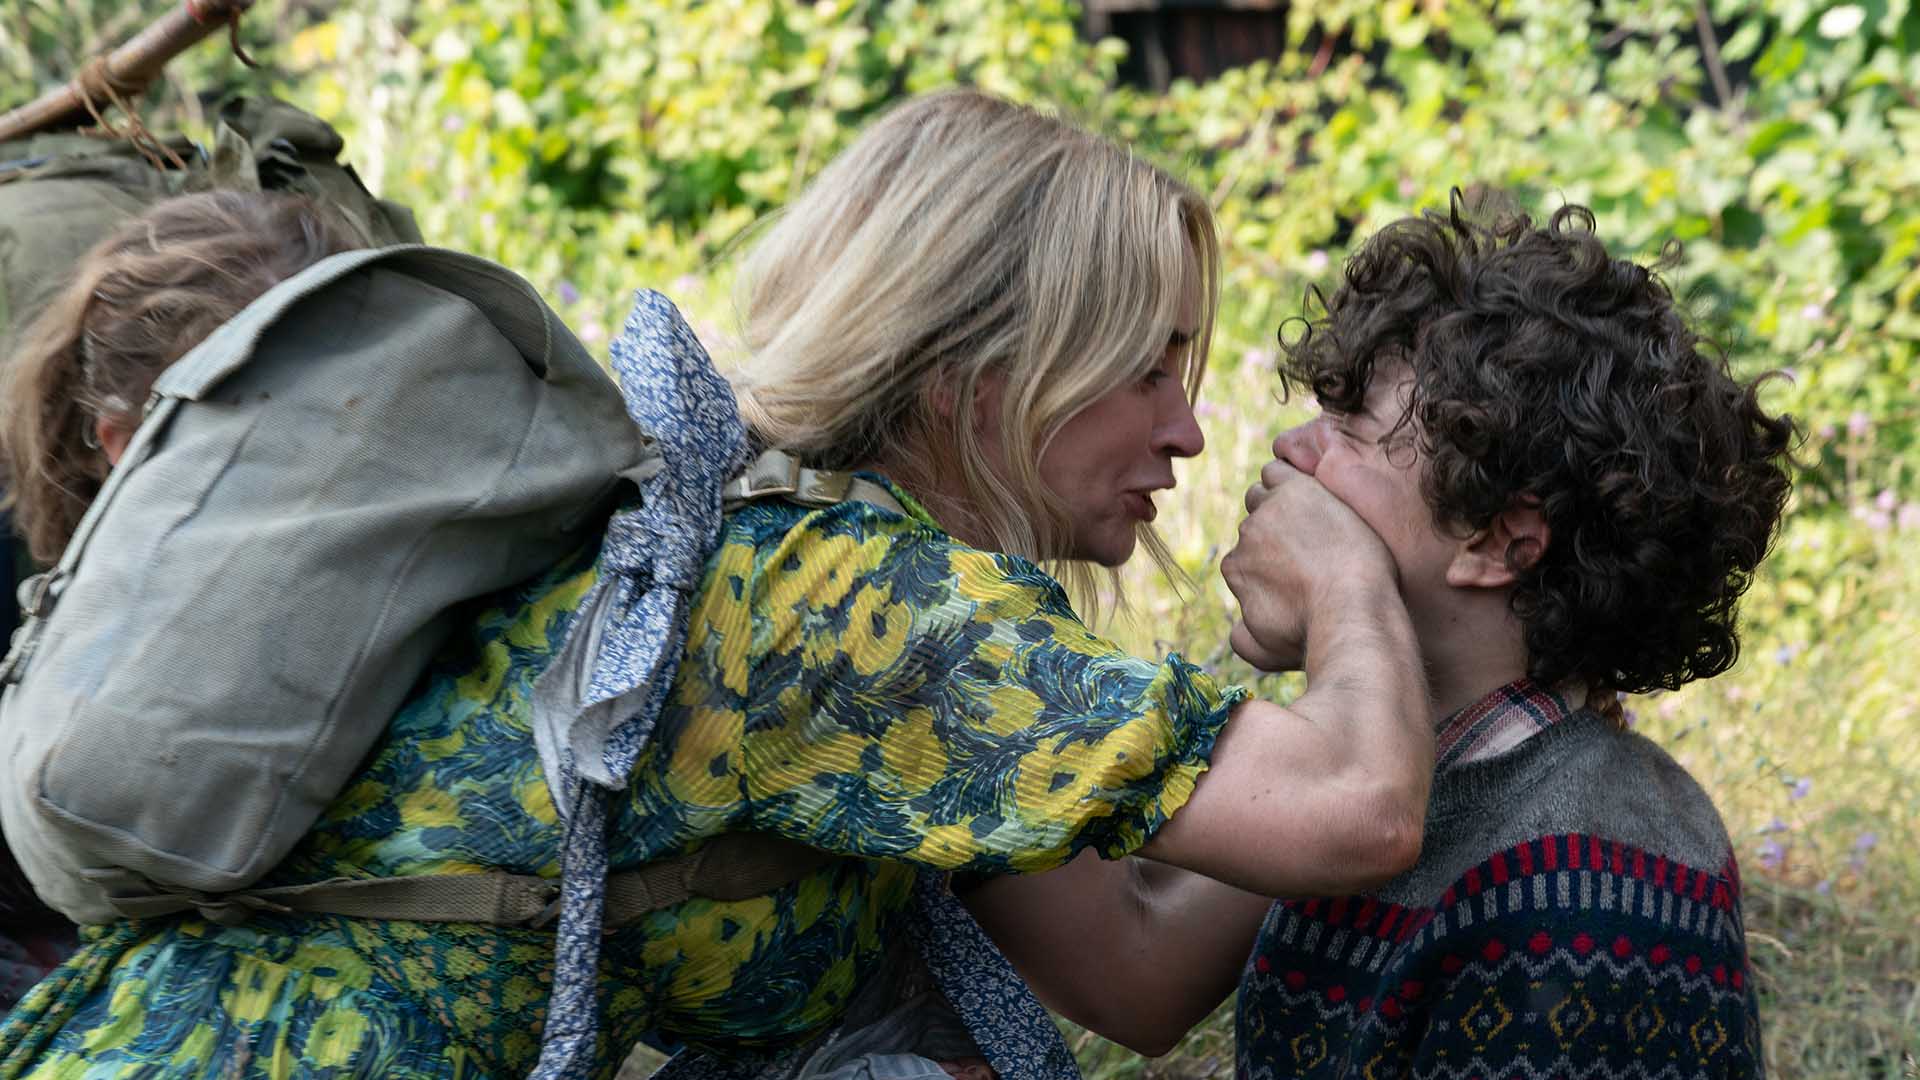 Emily Blunt Battles Monsters and Silence Again in the New Trailer for 'A Quiet Place Part II'